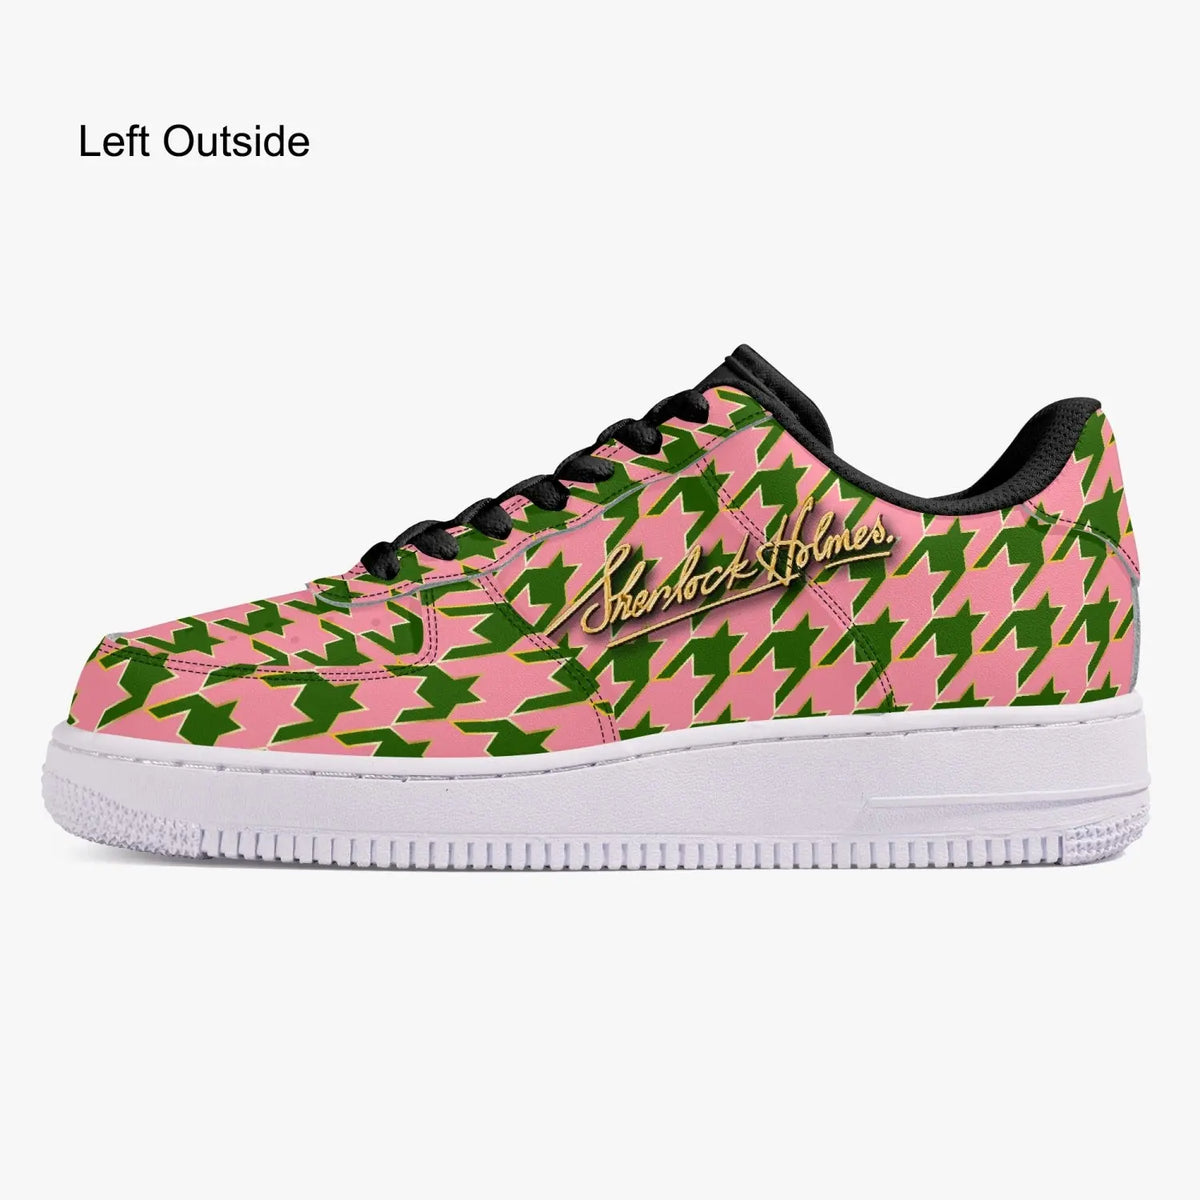 Sherlock Holmes Pink-Green Houndstooth Low-Top Leather Sneakers - The Sherlock Holmes Company